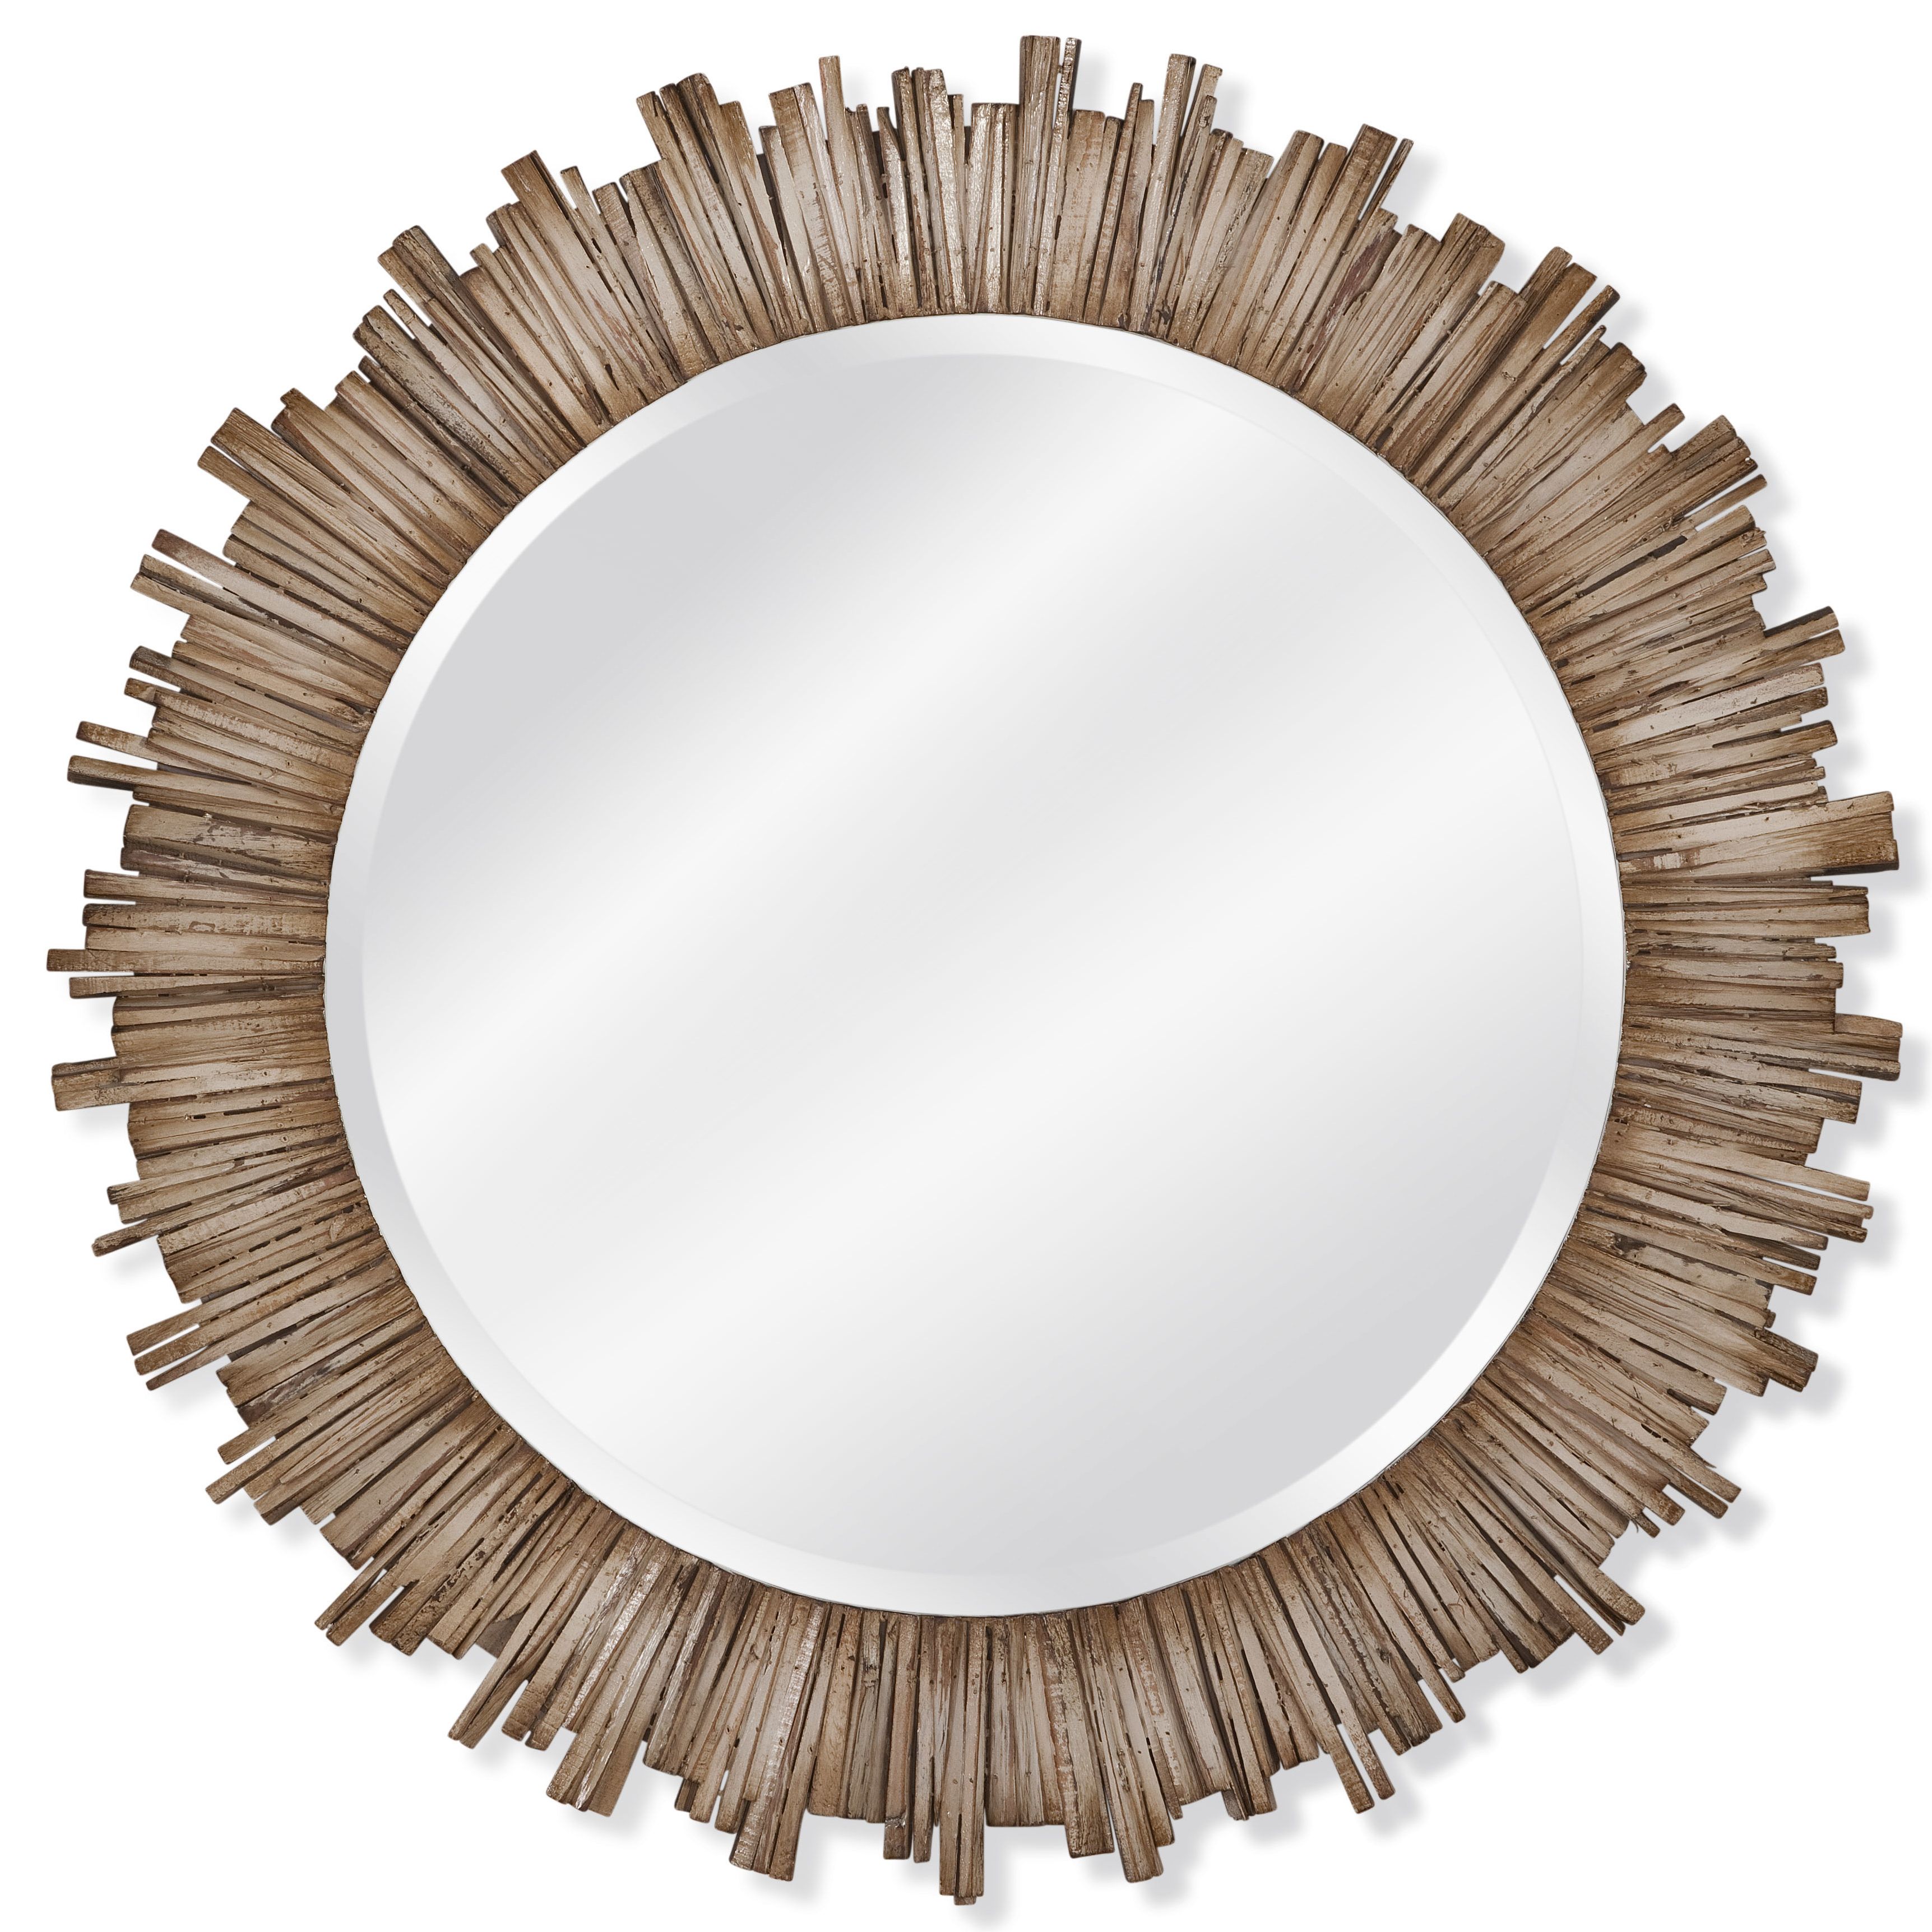 Karn Vertical Round Resin Wall Mirrors In 2019 Raleigh Wall Mirror (View 13 of 20)